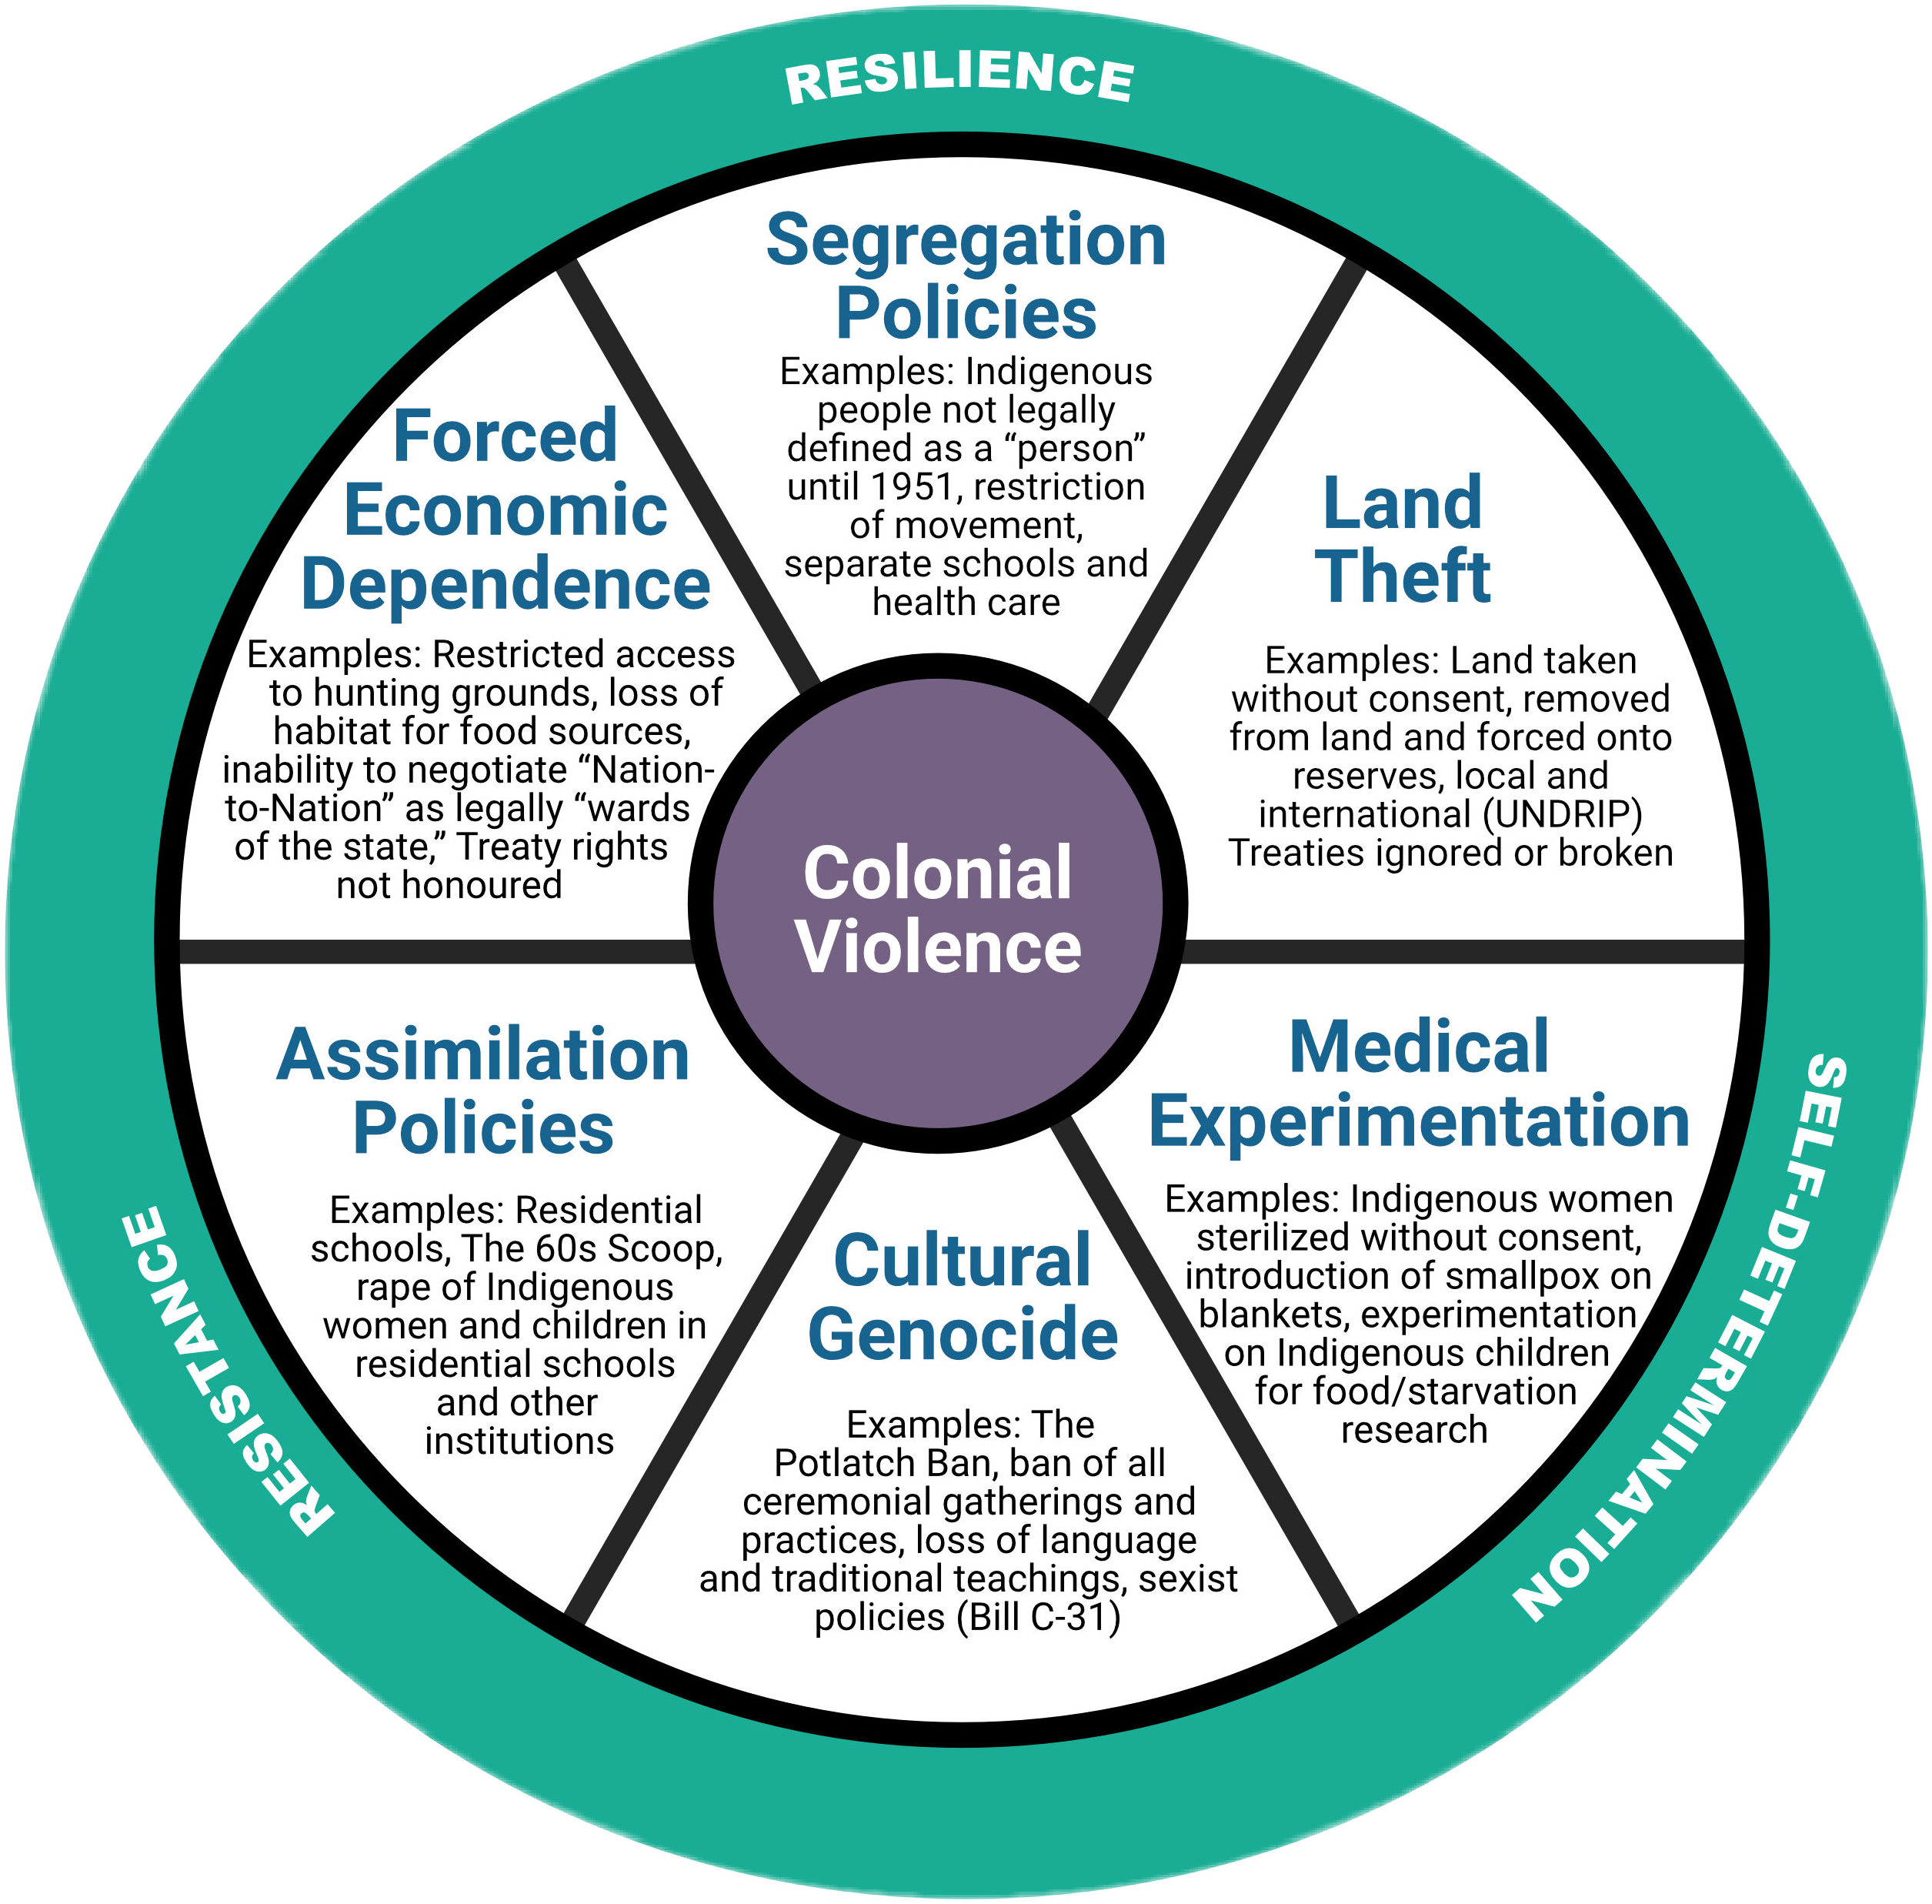 The colonial violence wheel. Image description linked to in caption.